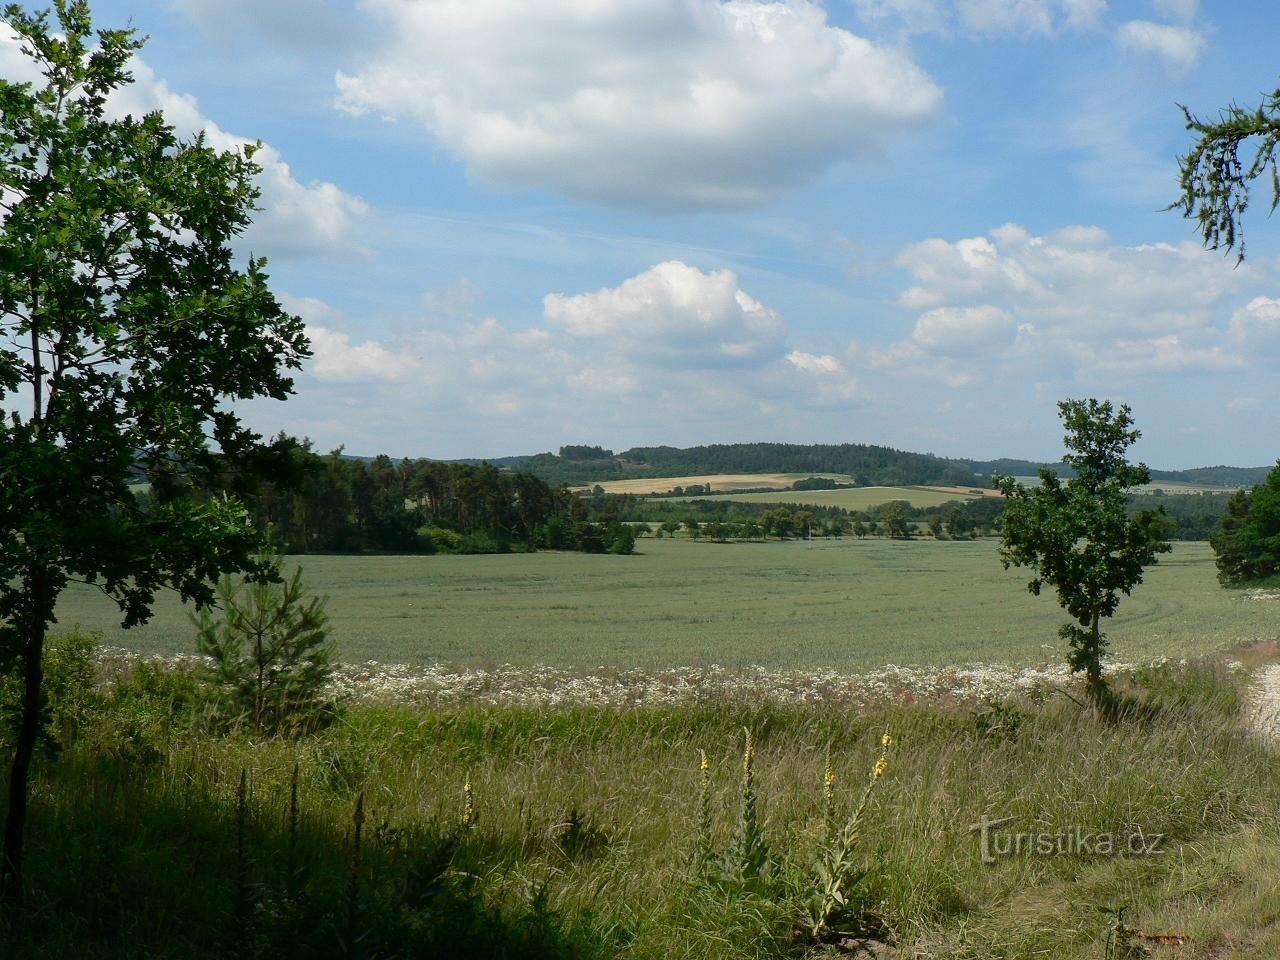 View from the crossroads under Dominka to the west